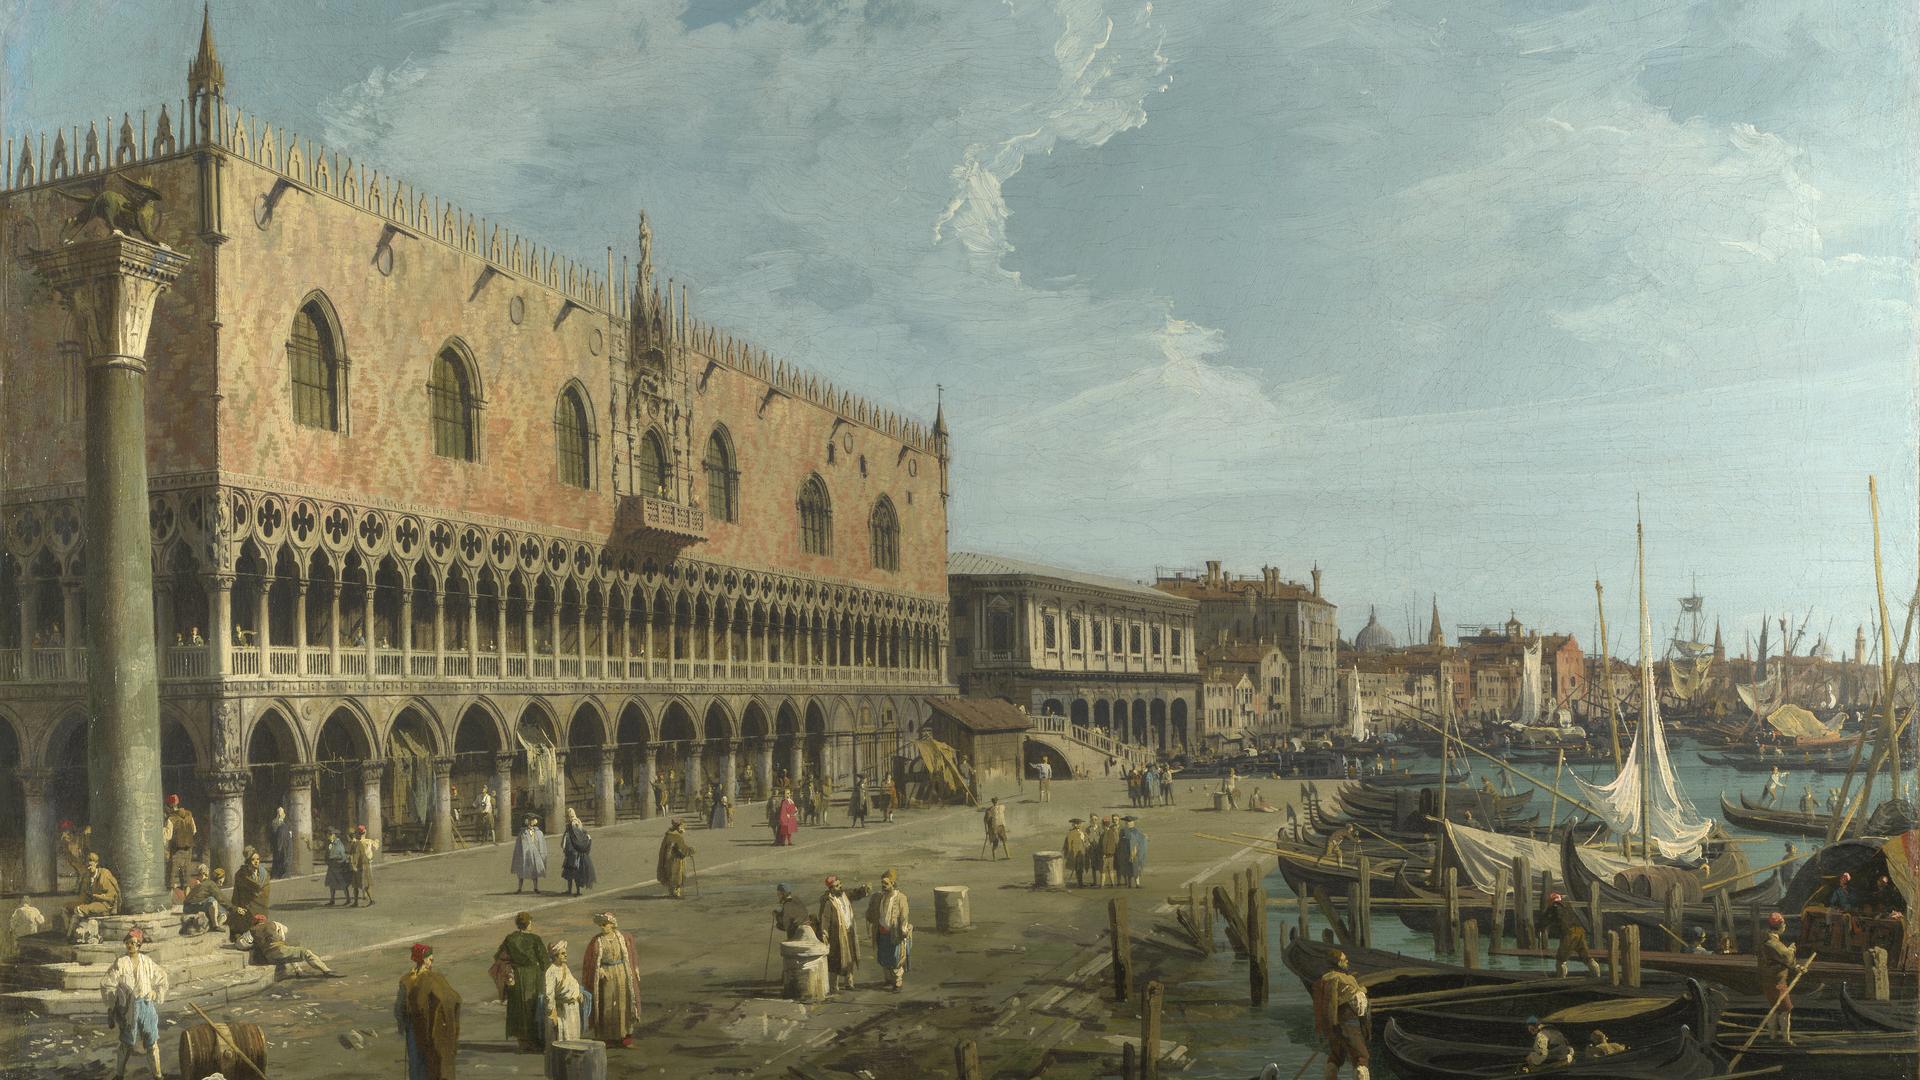 Venice: The Doge's Palace and the Riva degli Schiavoni by Canaletto